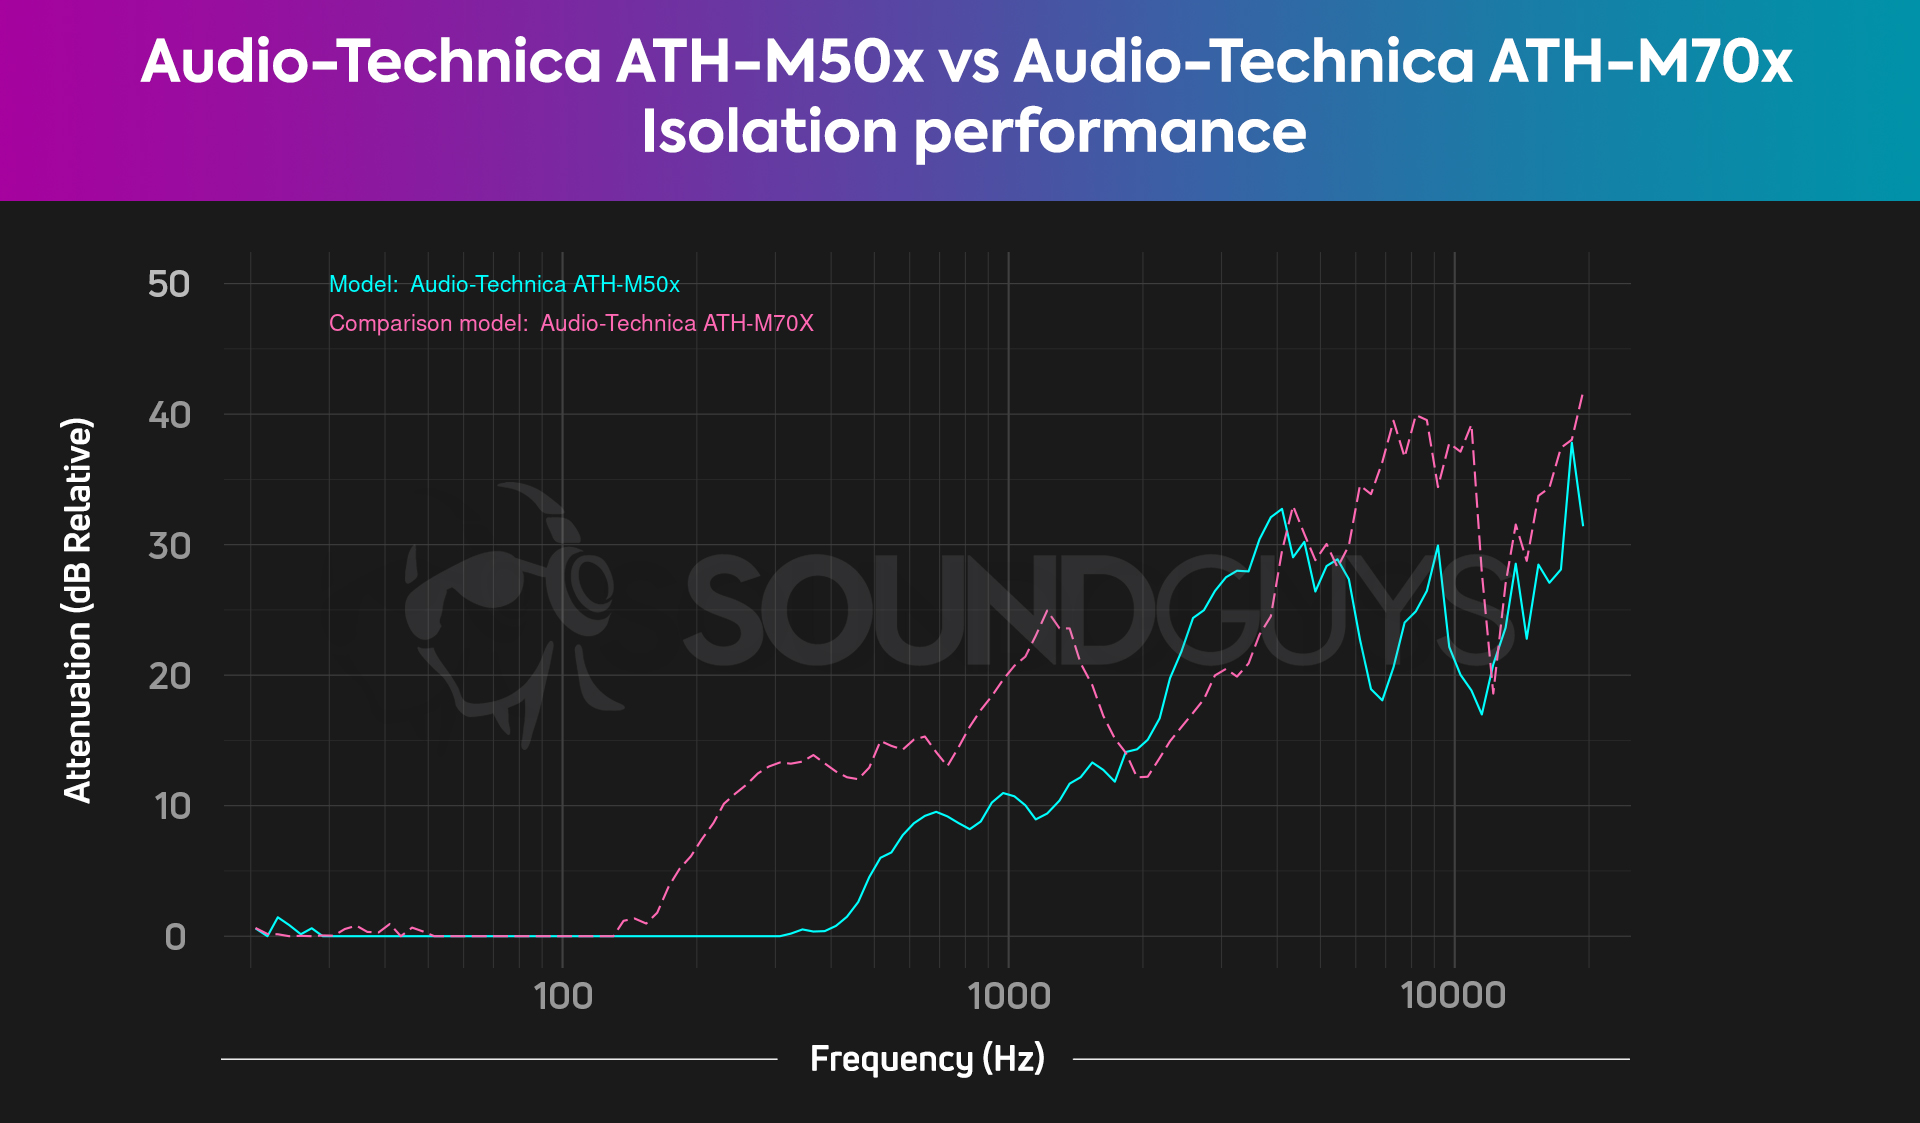 A chart shows the isolation performance of the Audio-Technica ATH-M50x and Audio-Technica ATH-M70x with the latter blocking more noise.